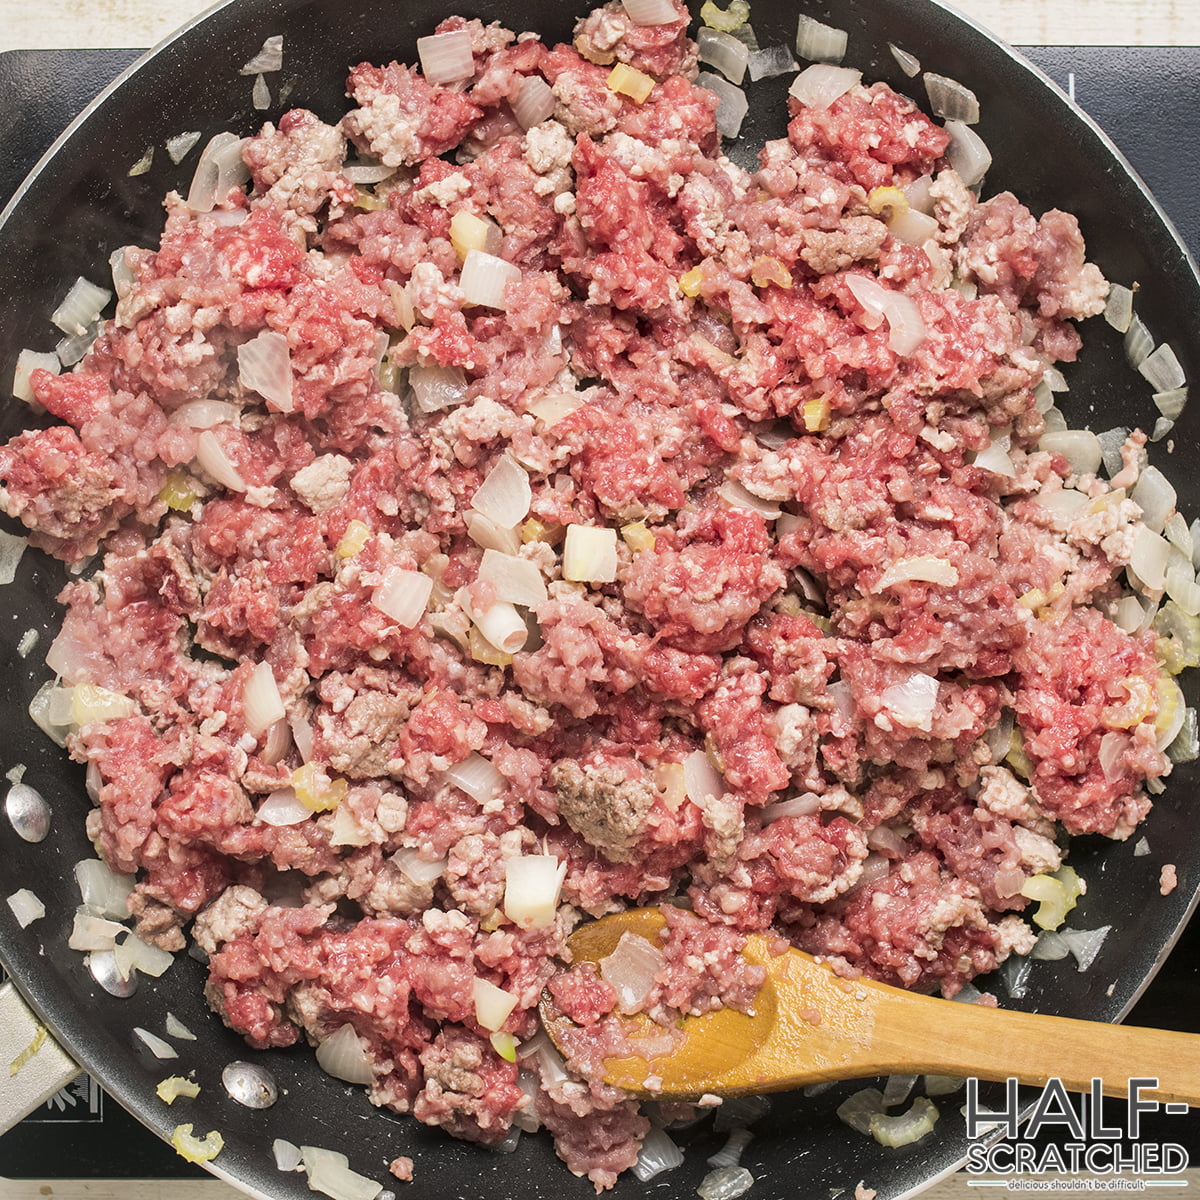 Ground beef and onions sautéing in a skillet